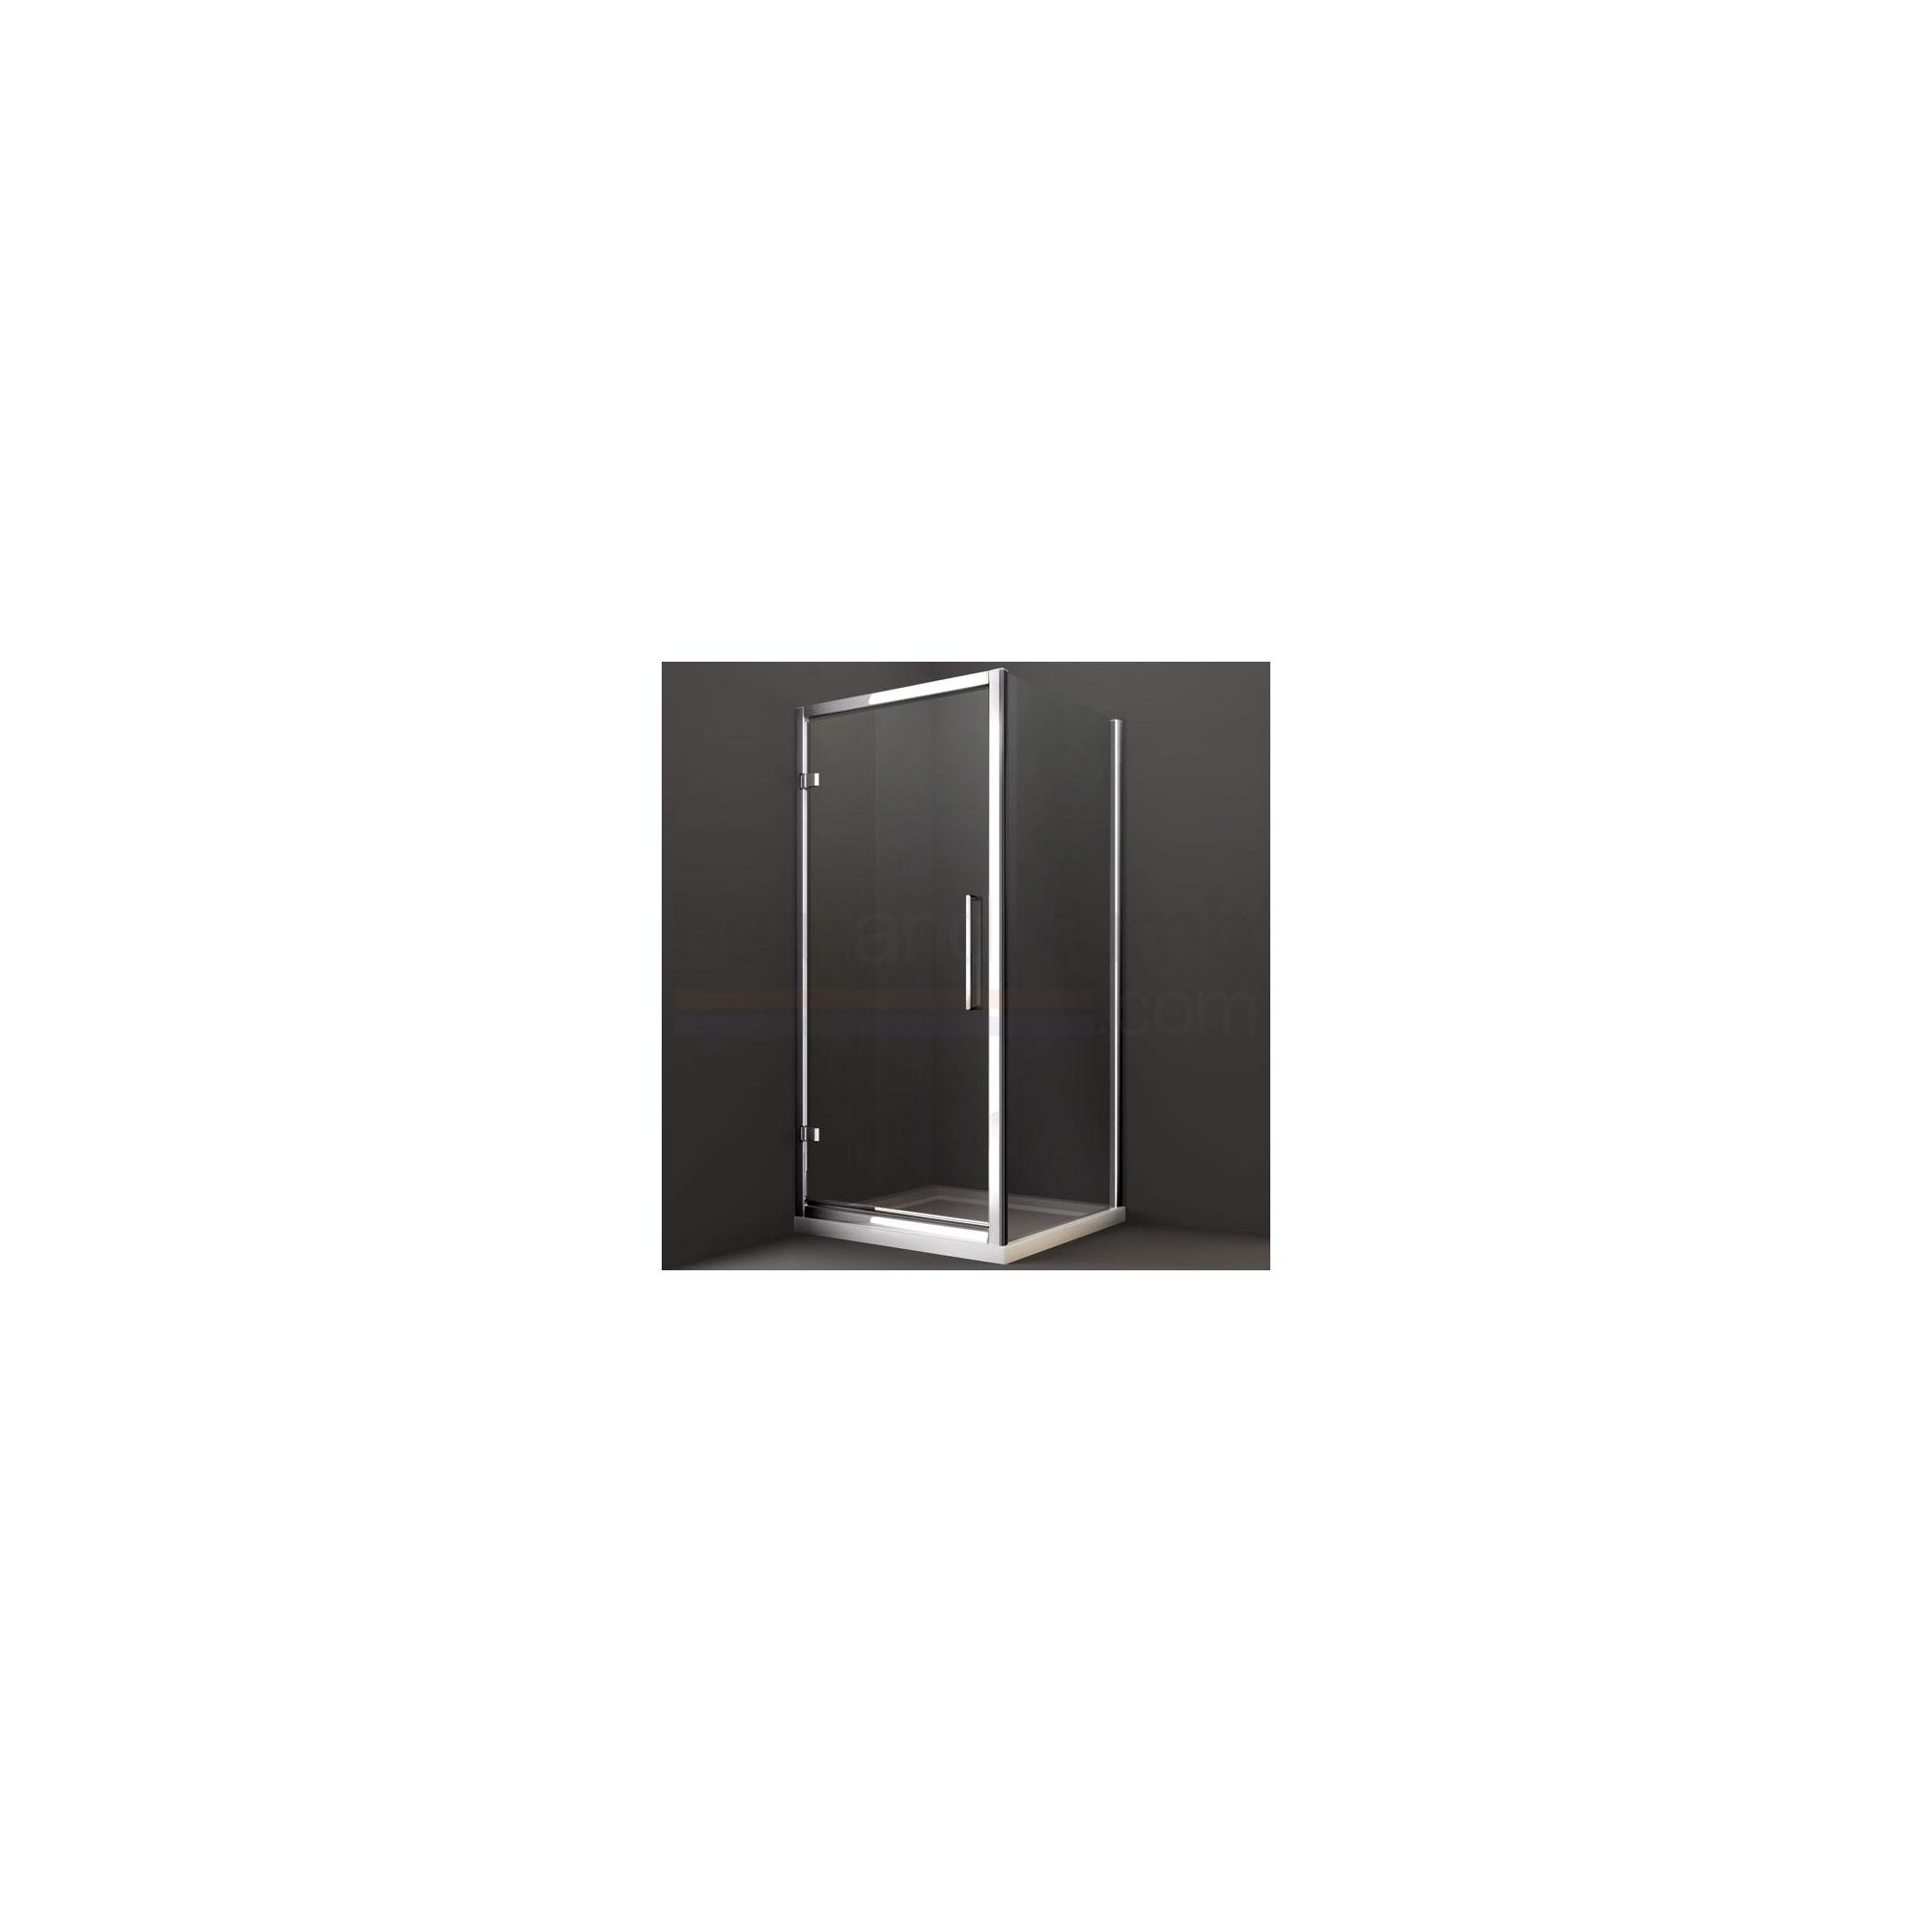 Merlyn Series 8 Hinged Door with Side Panel Shower Enclosure, 900mm, Low Profile Tray, 8mm Glass at Tescos Direct